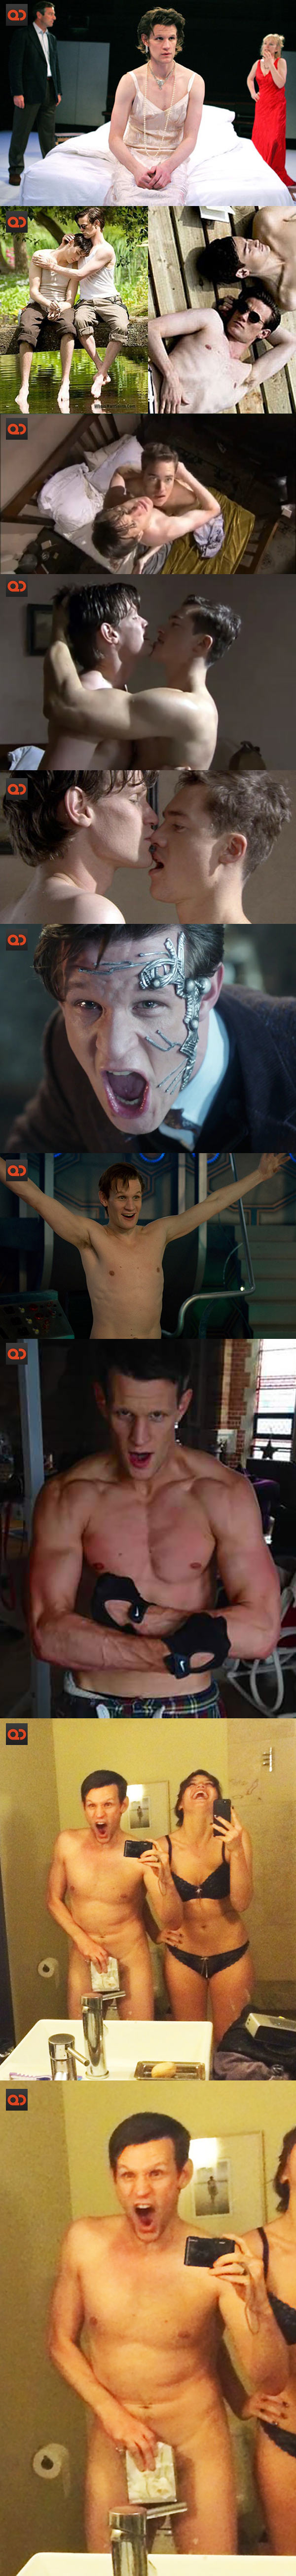 Matt Smith, Uncensored Naked Selfies Hit - The Dr Who Star Exposed His Butt And His “Sonic Screwdriver”!